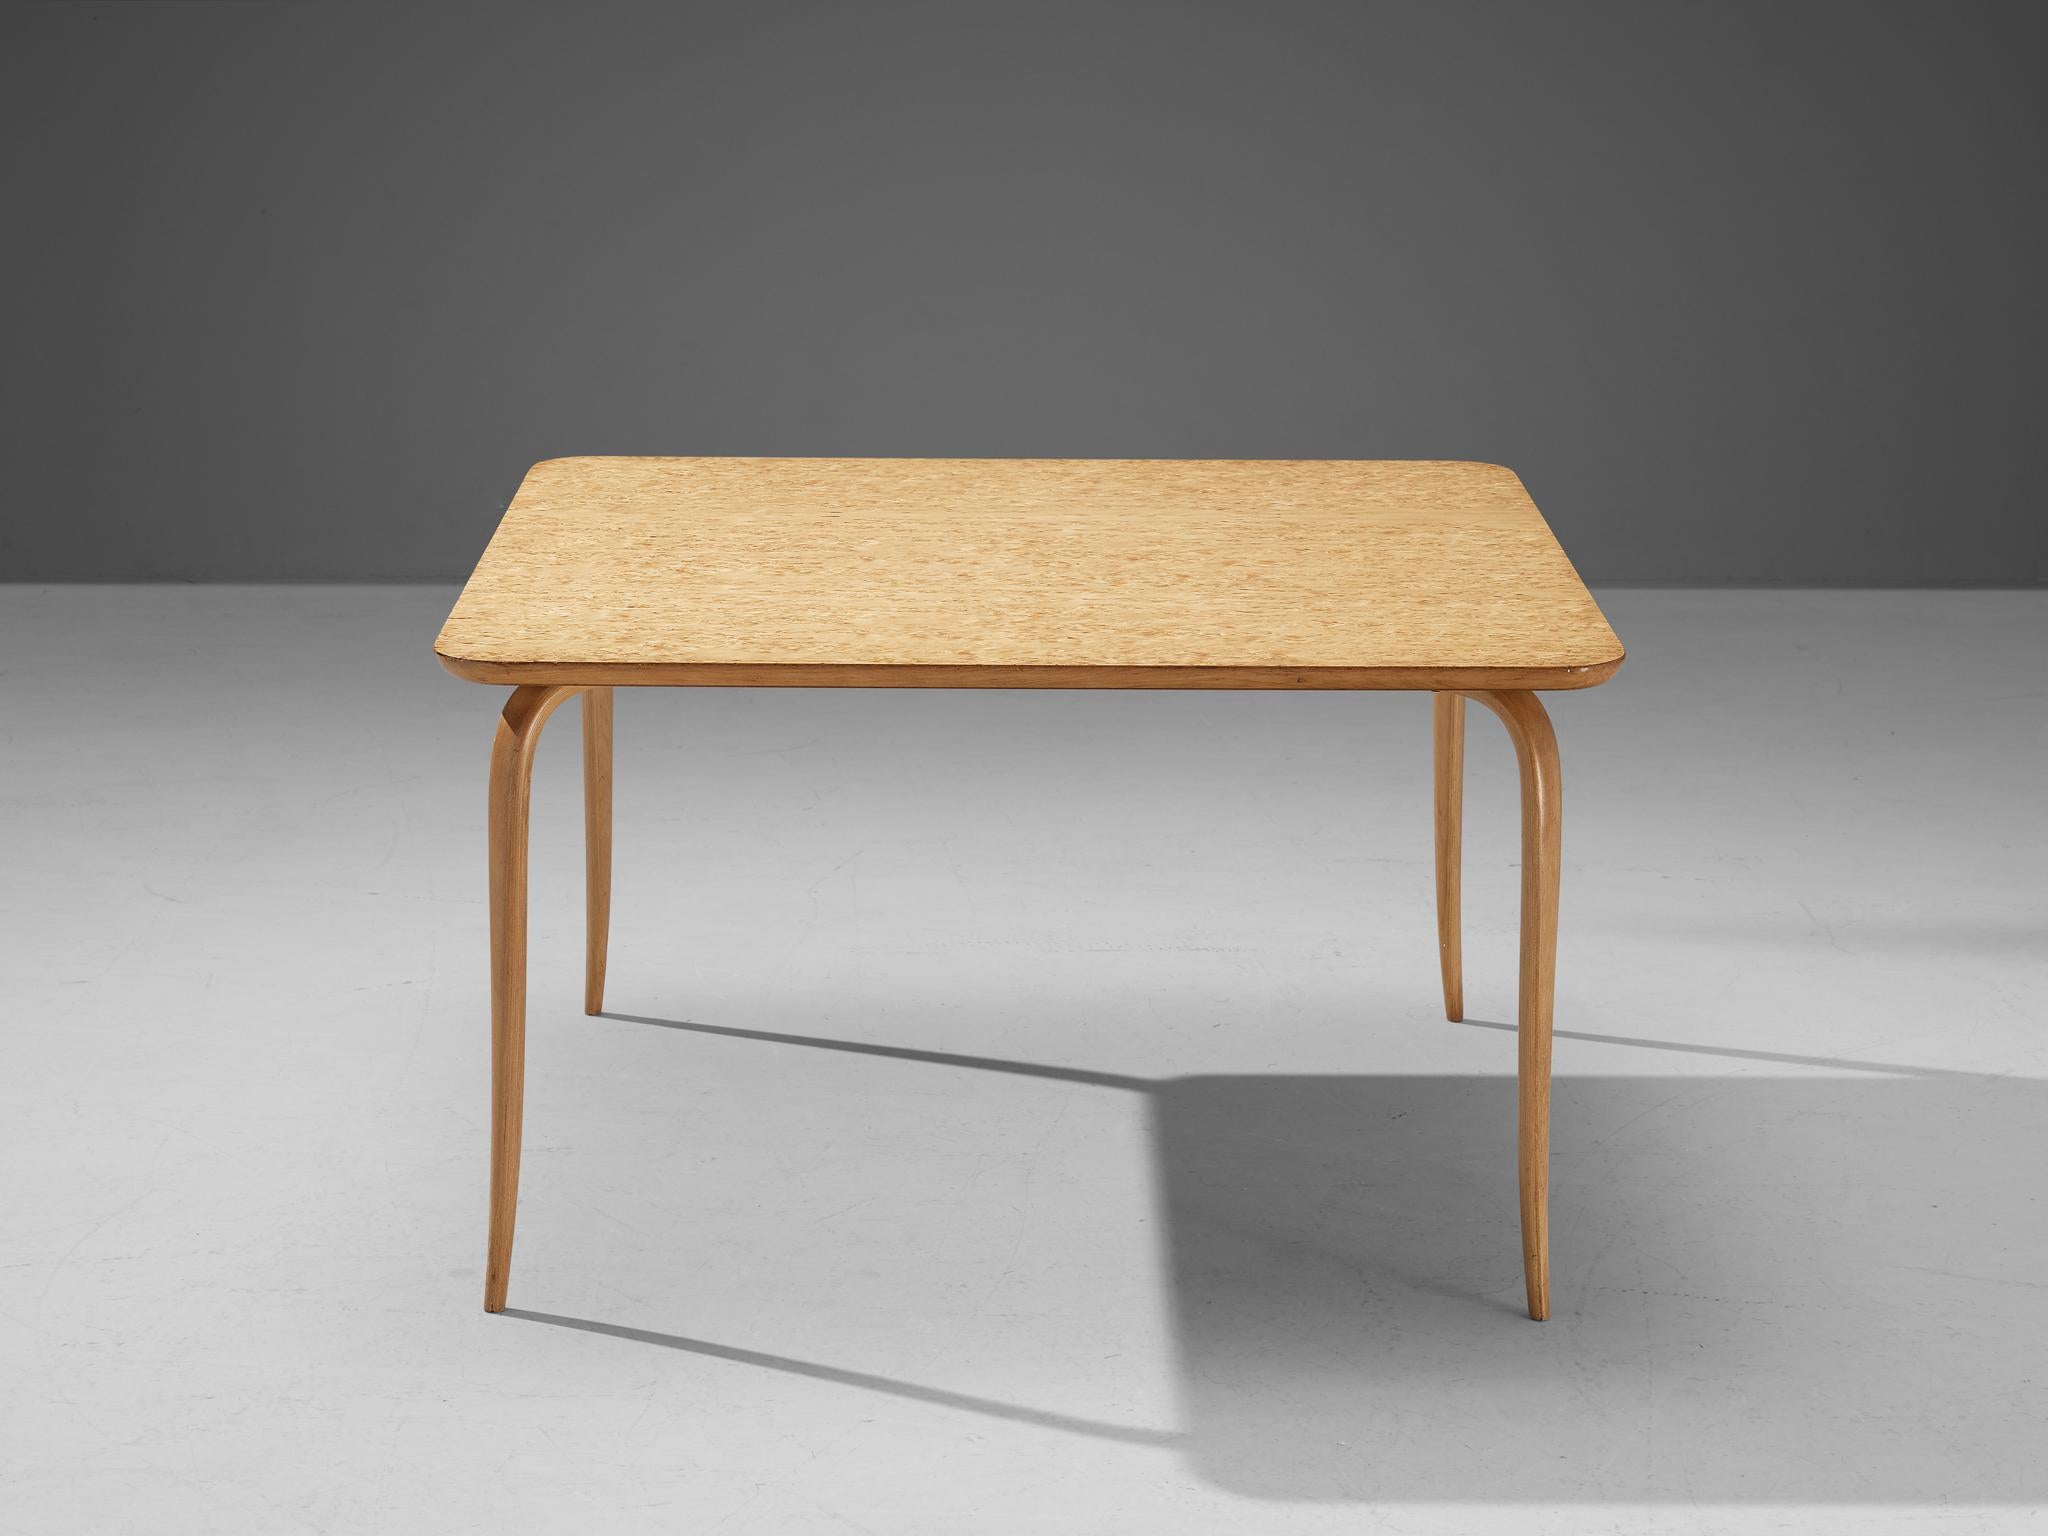 Bruno Mathsson, coffee table model 'Annika', birch, Sweden 1950s.

Beautiful and elegant coffee table designed by Bruno Mathsson. This 'Annika' coffee table has birch plywood legs, which are fluently curved and tapered. These light legs are